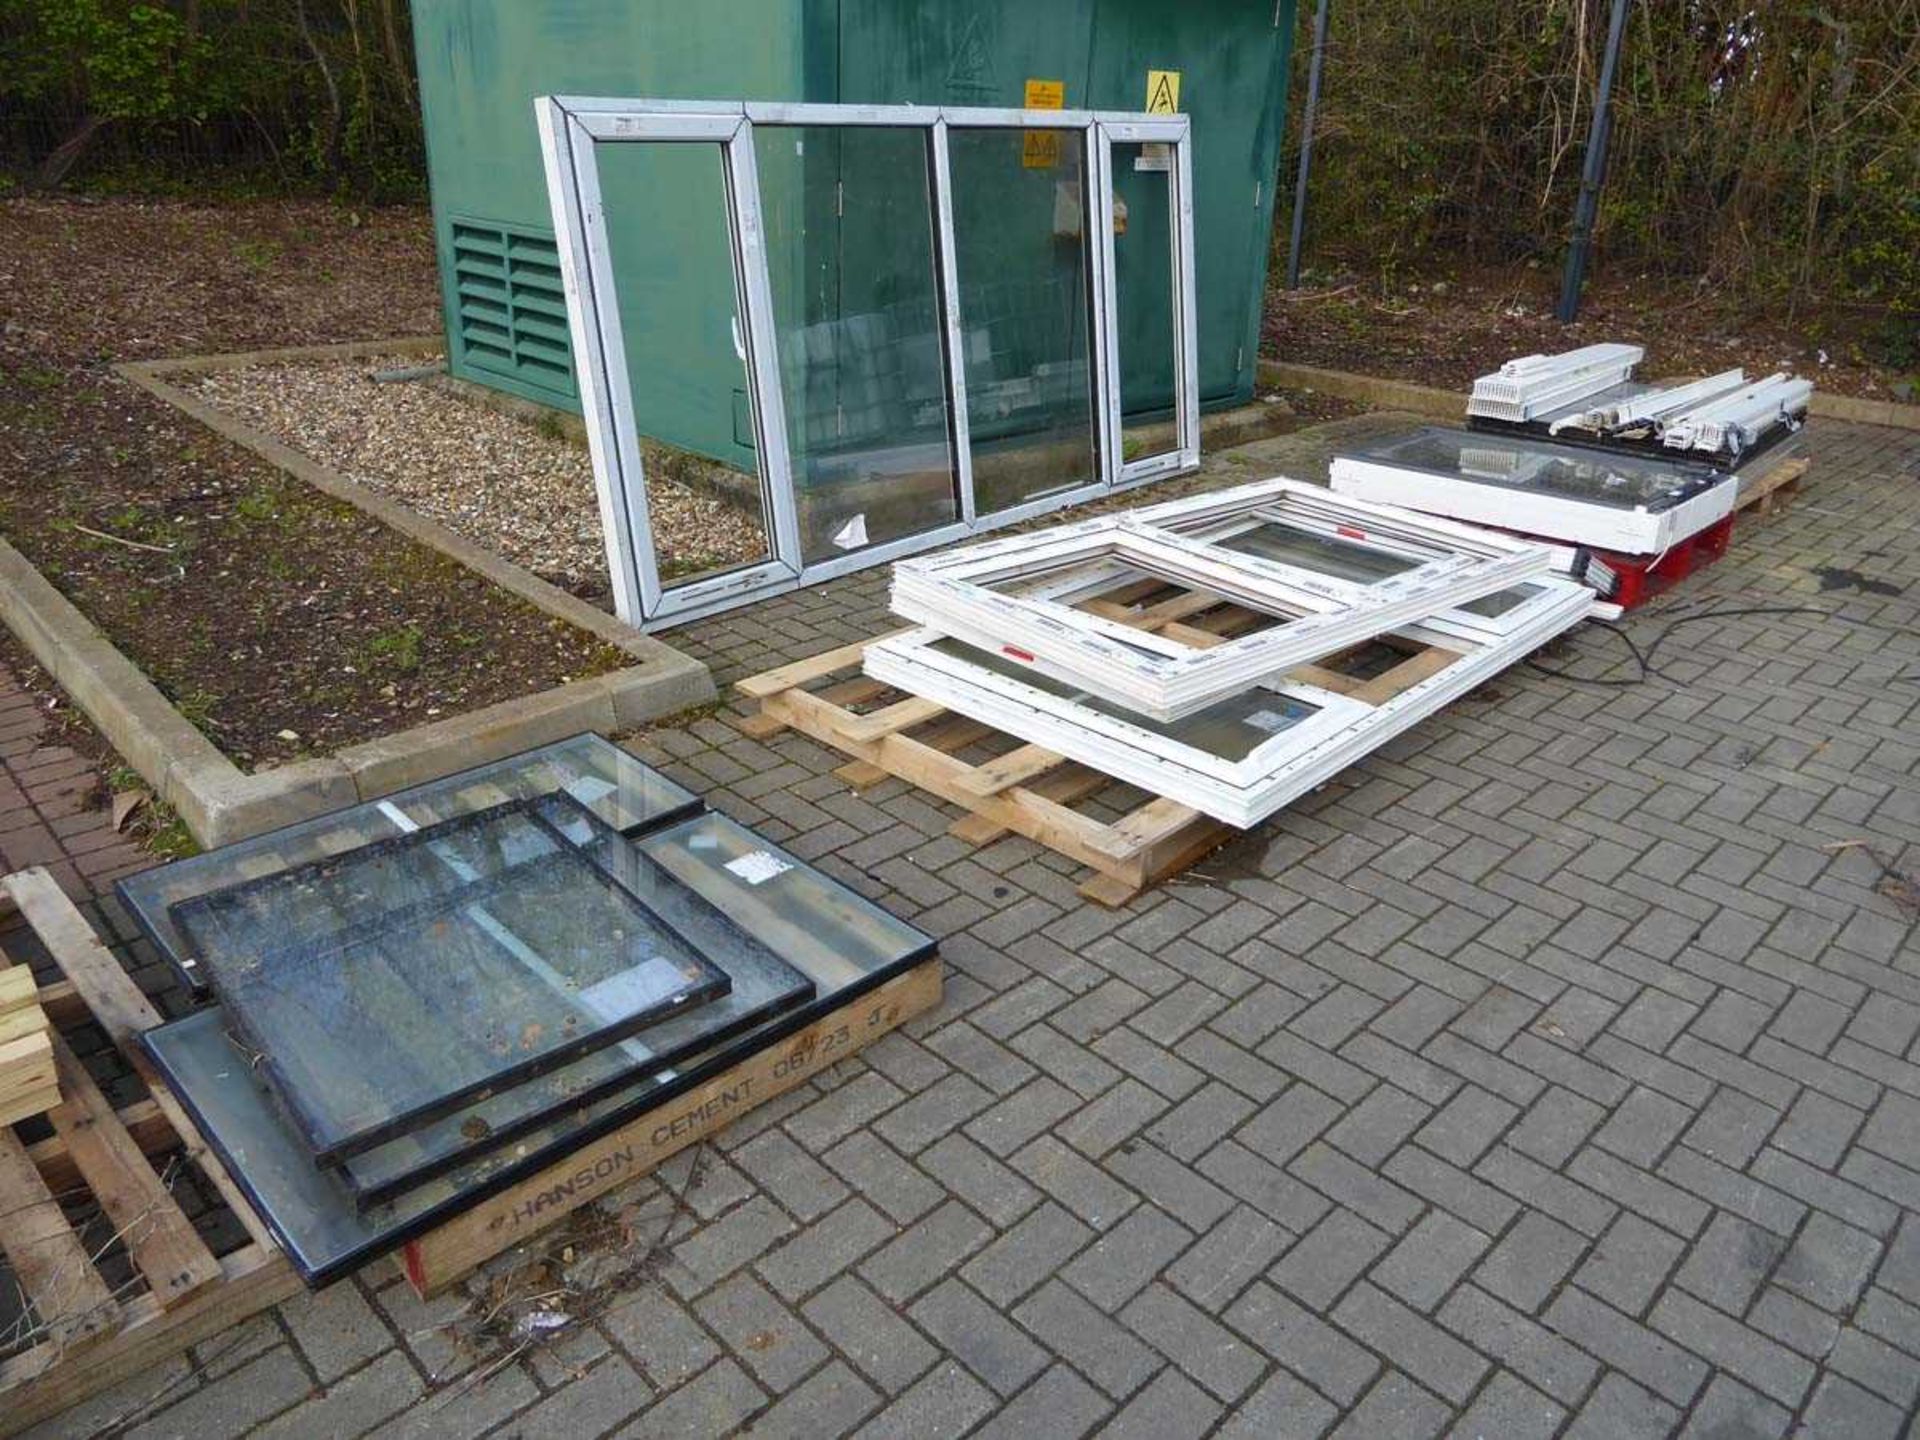 Four pallets containing various windows, glazed and unglazed, including roof window